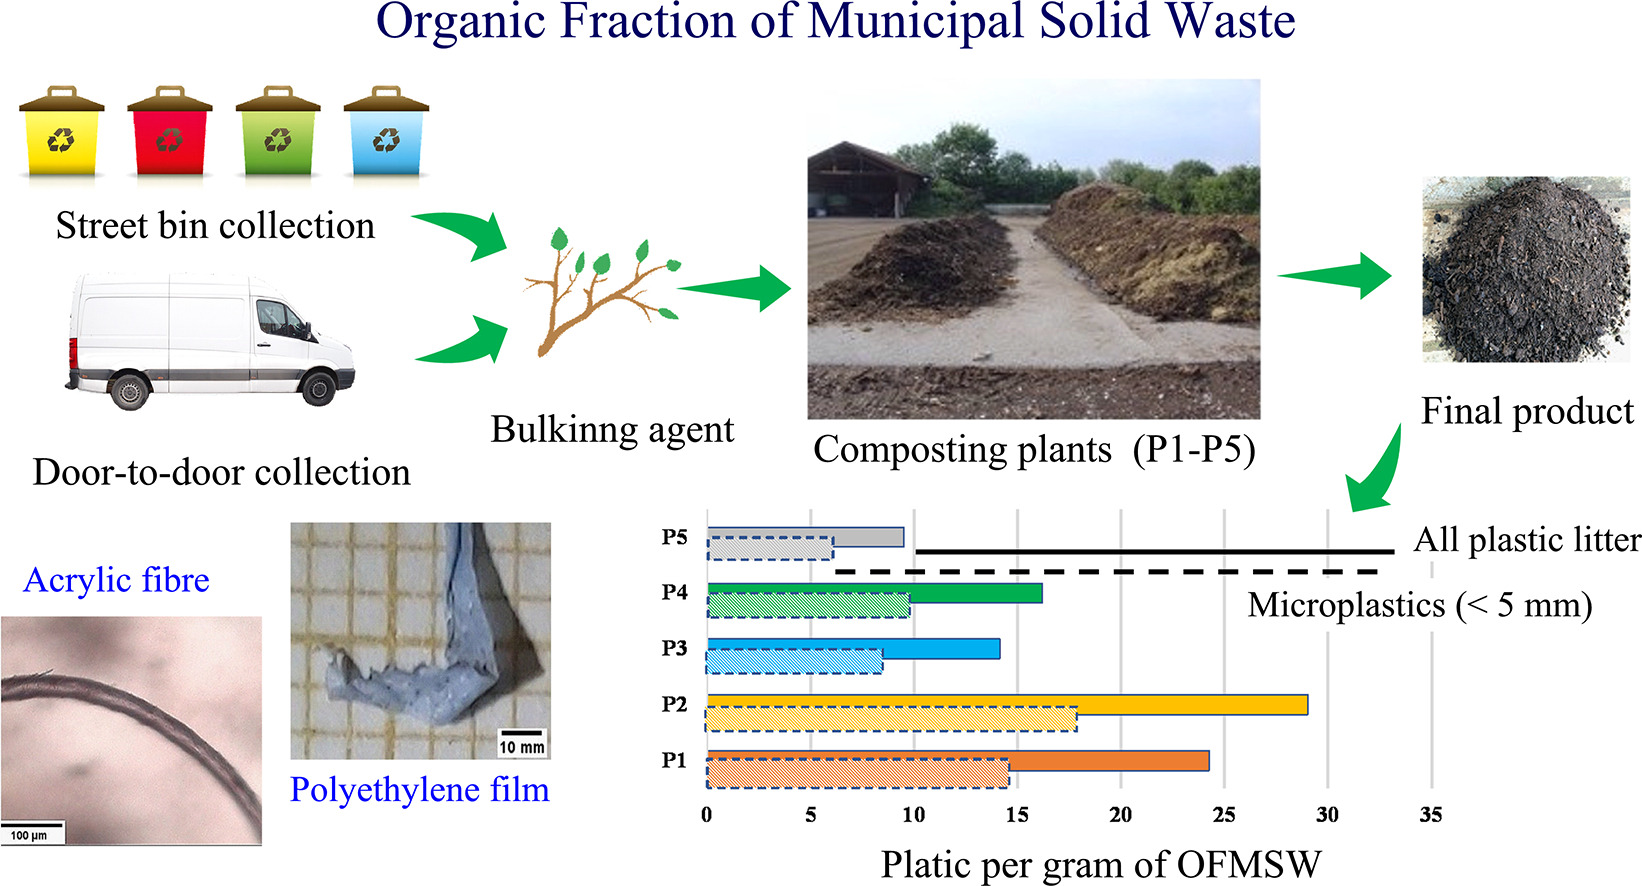 Organic Fraction of Municipal Solid Waste - Microplastics identification and quantification in the composted organic fraction of municipal solid waste